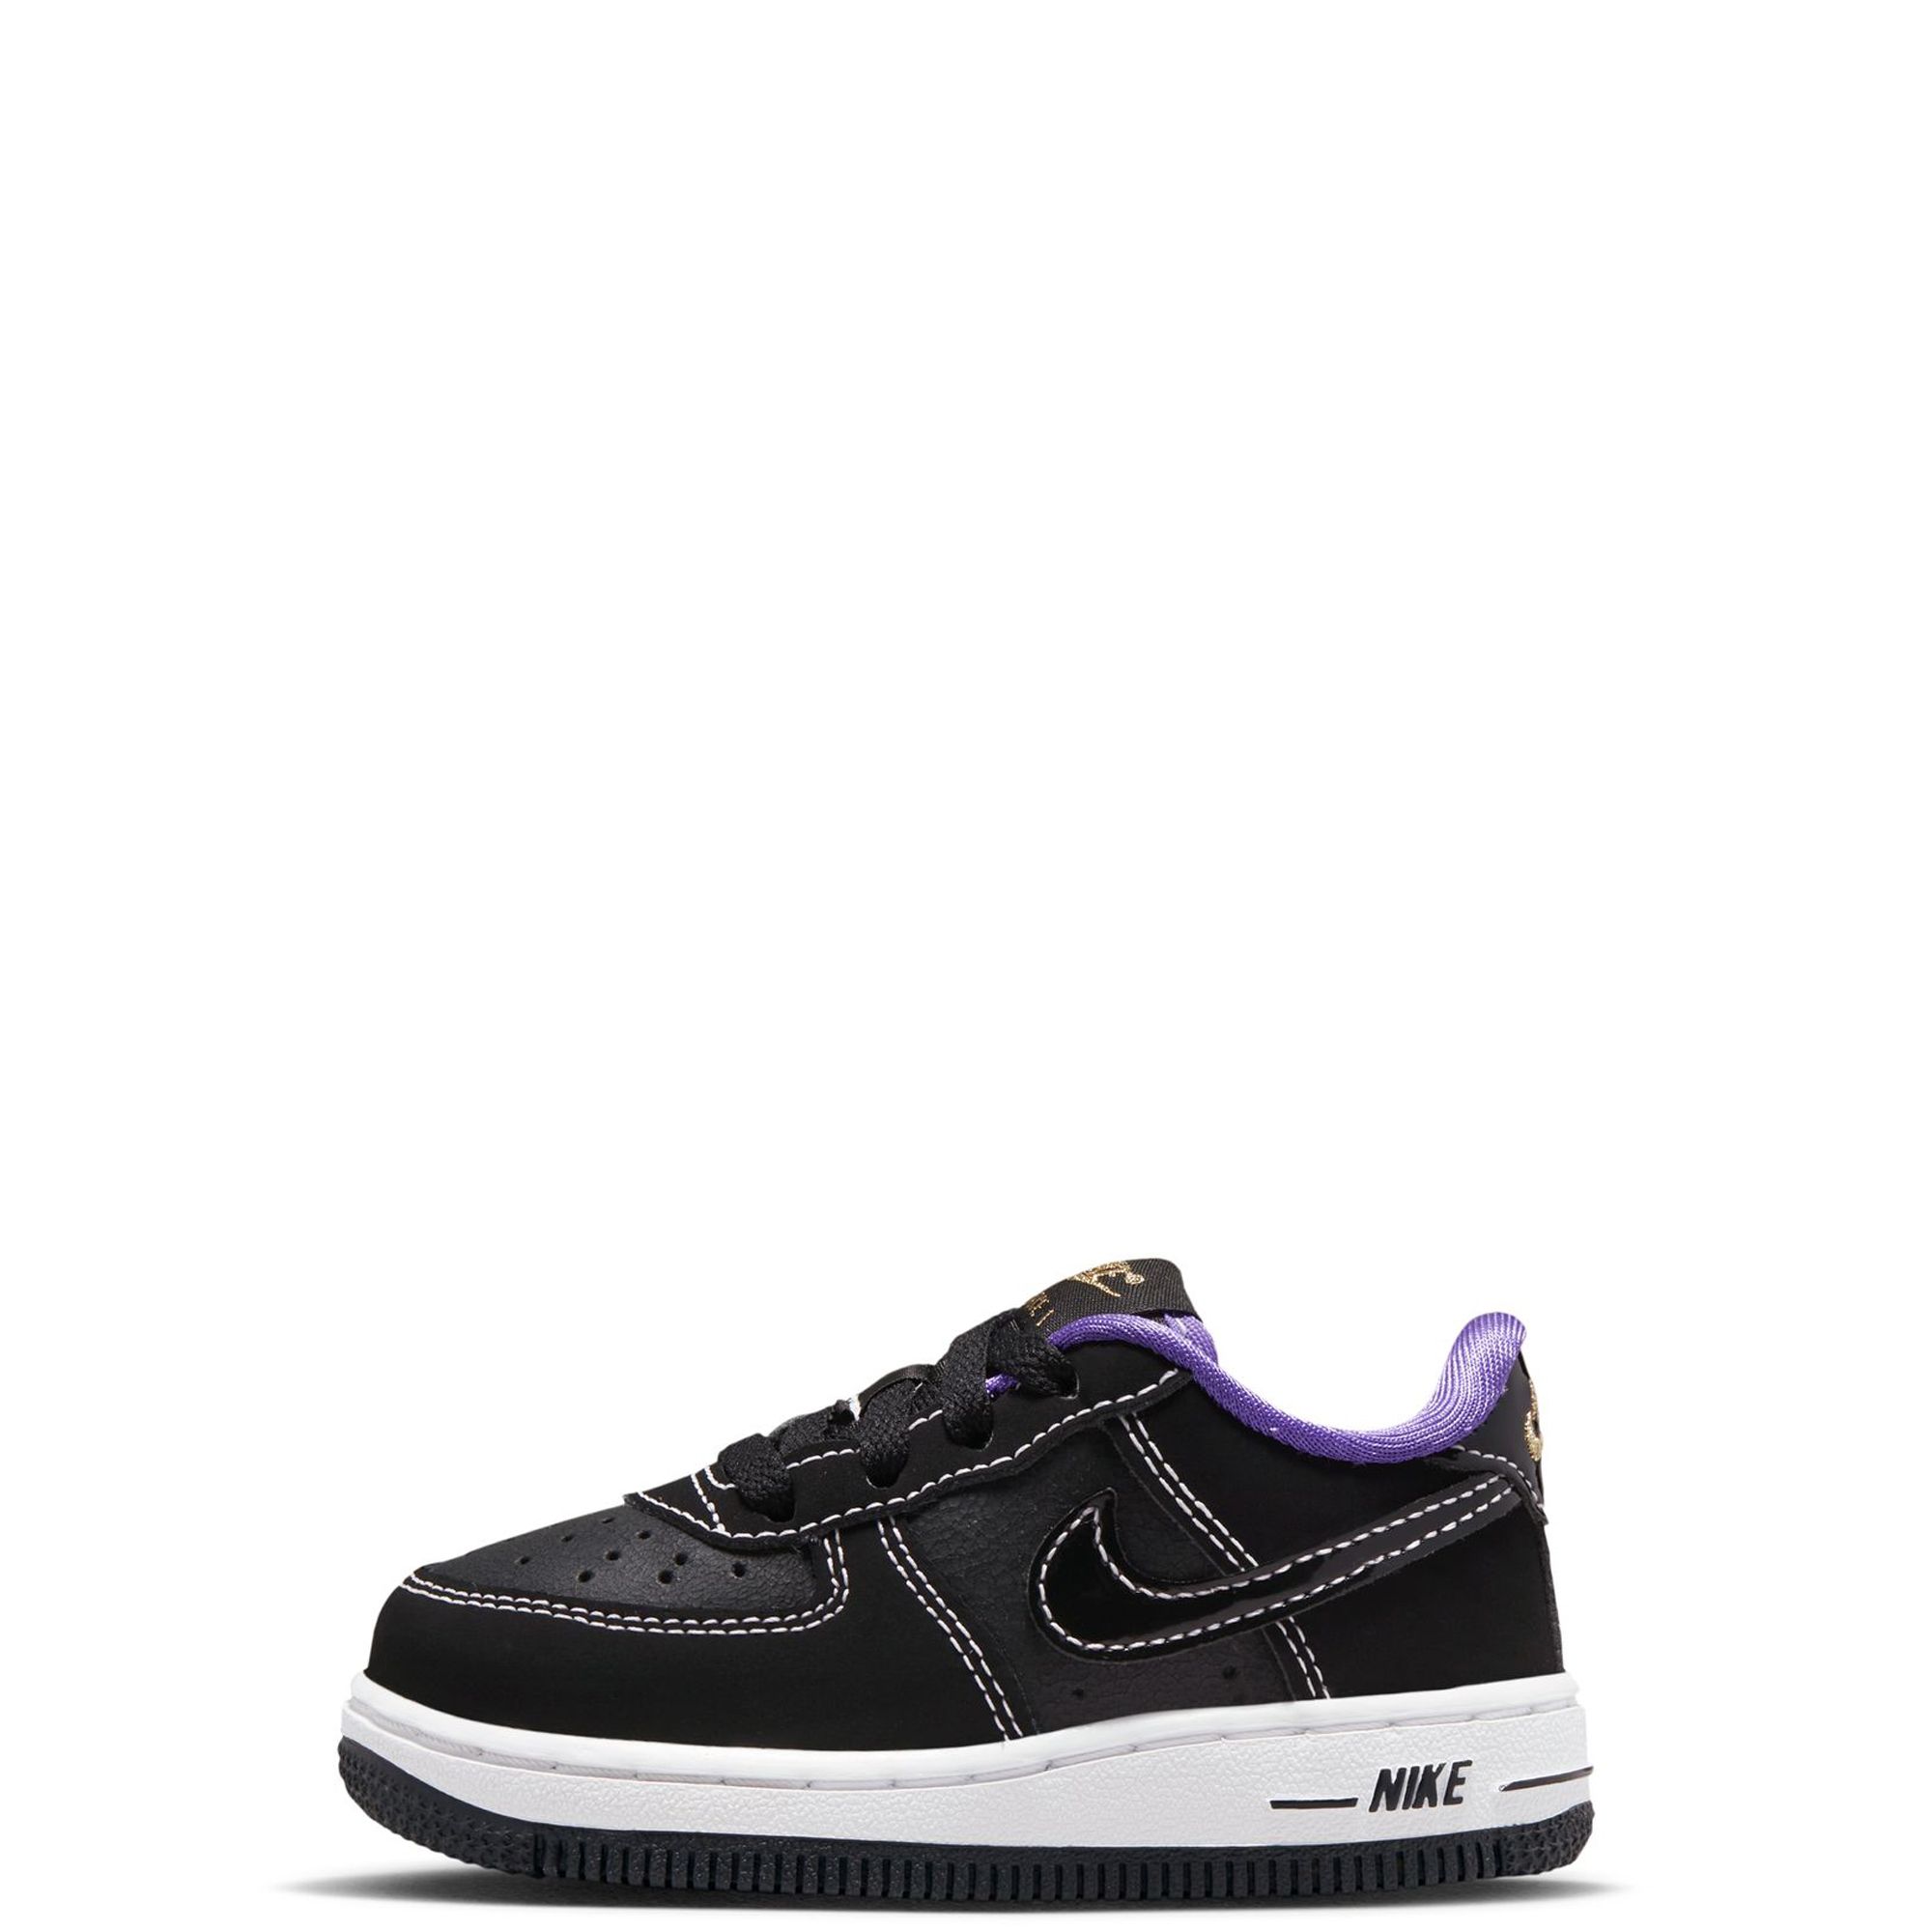 Nike Air Force 1 LV8 Infant Toddler Lifestyle Shoes Black DQ0550